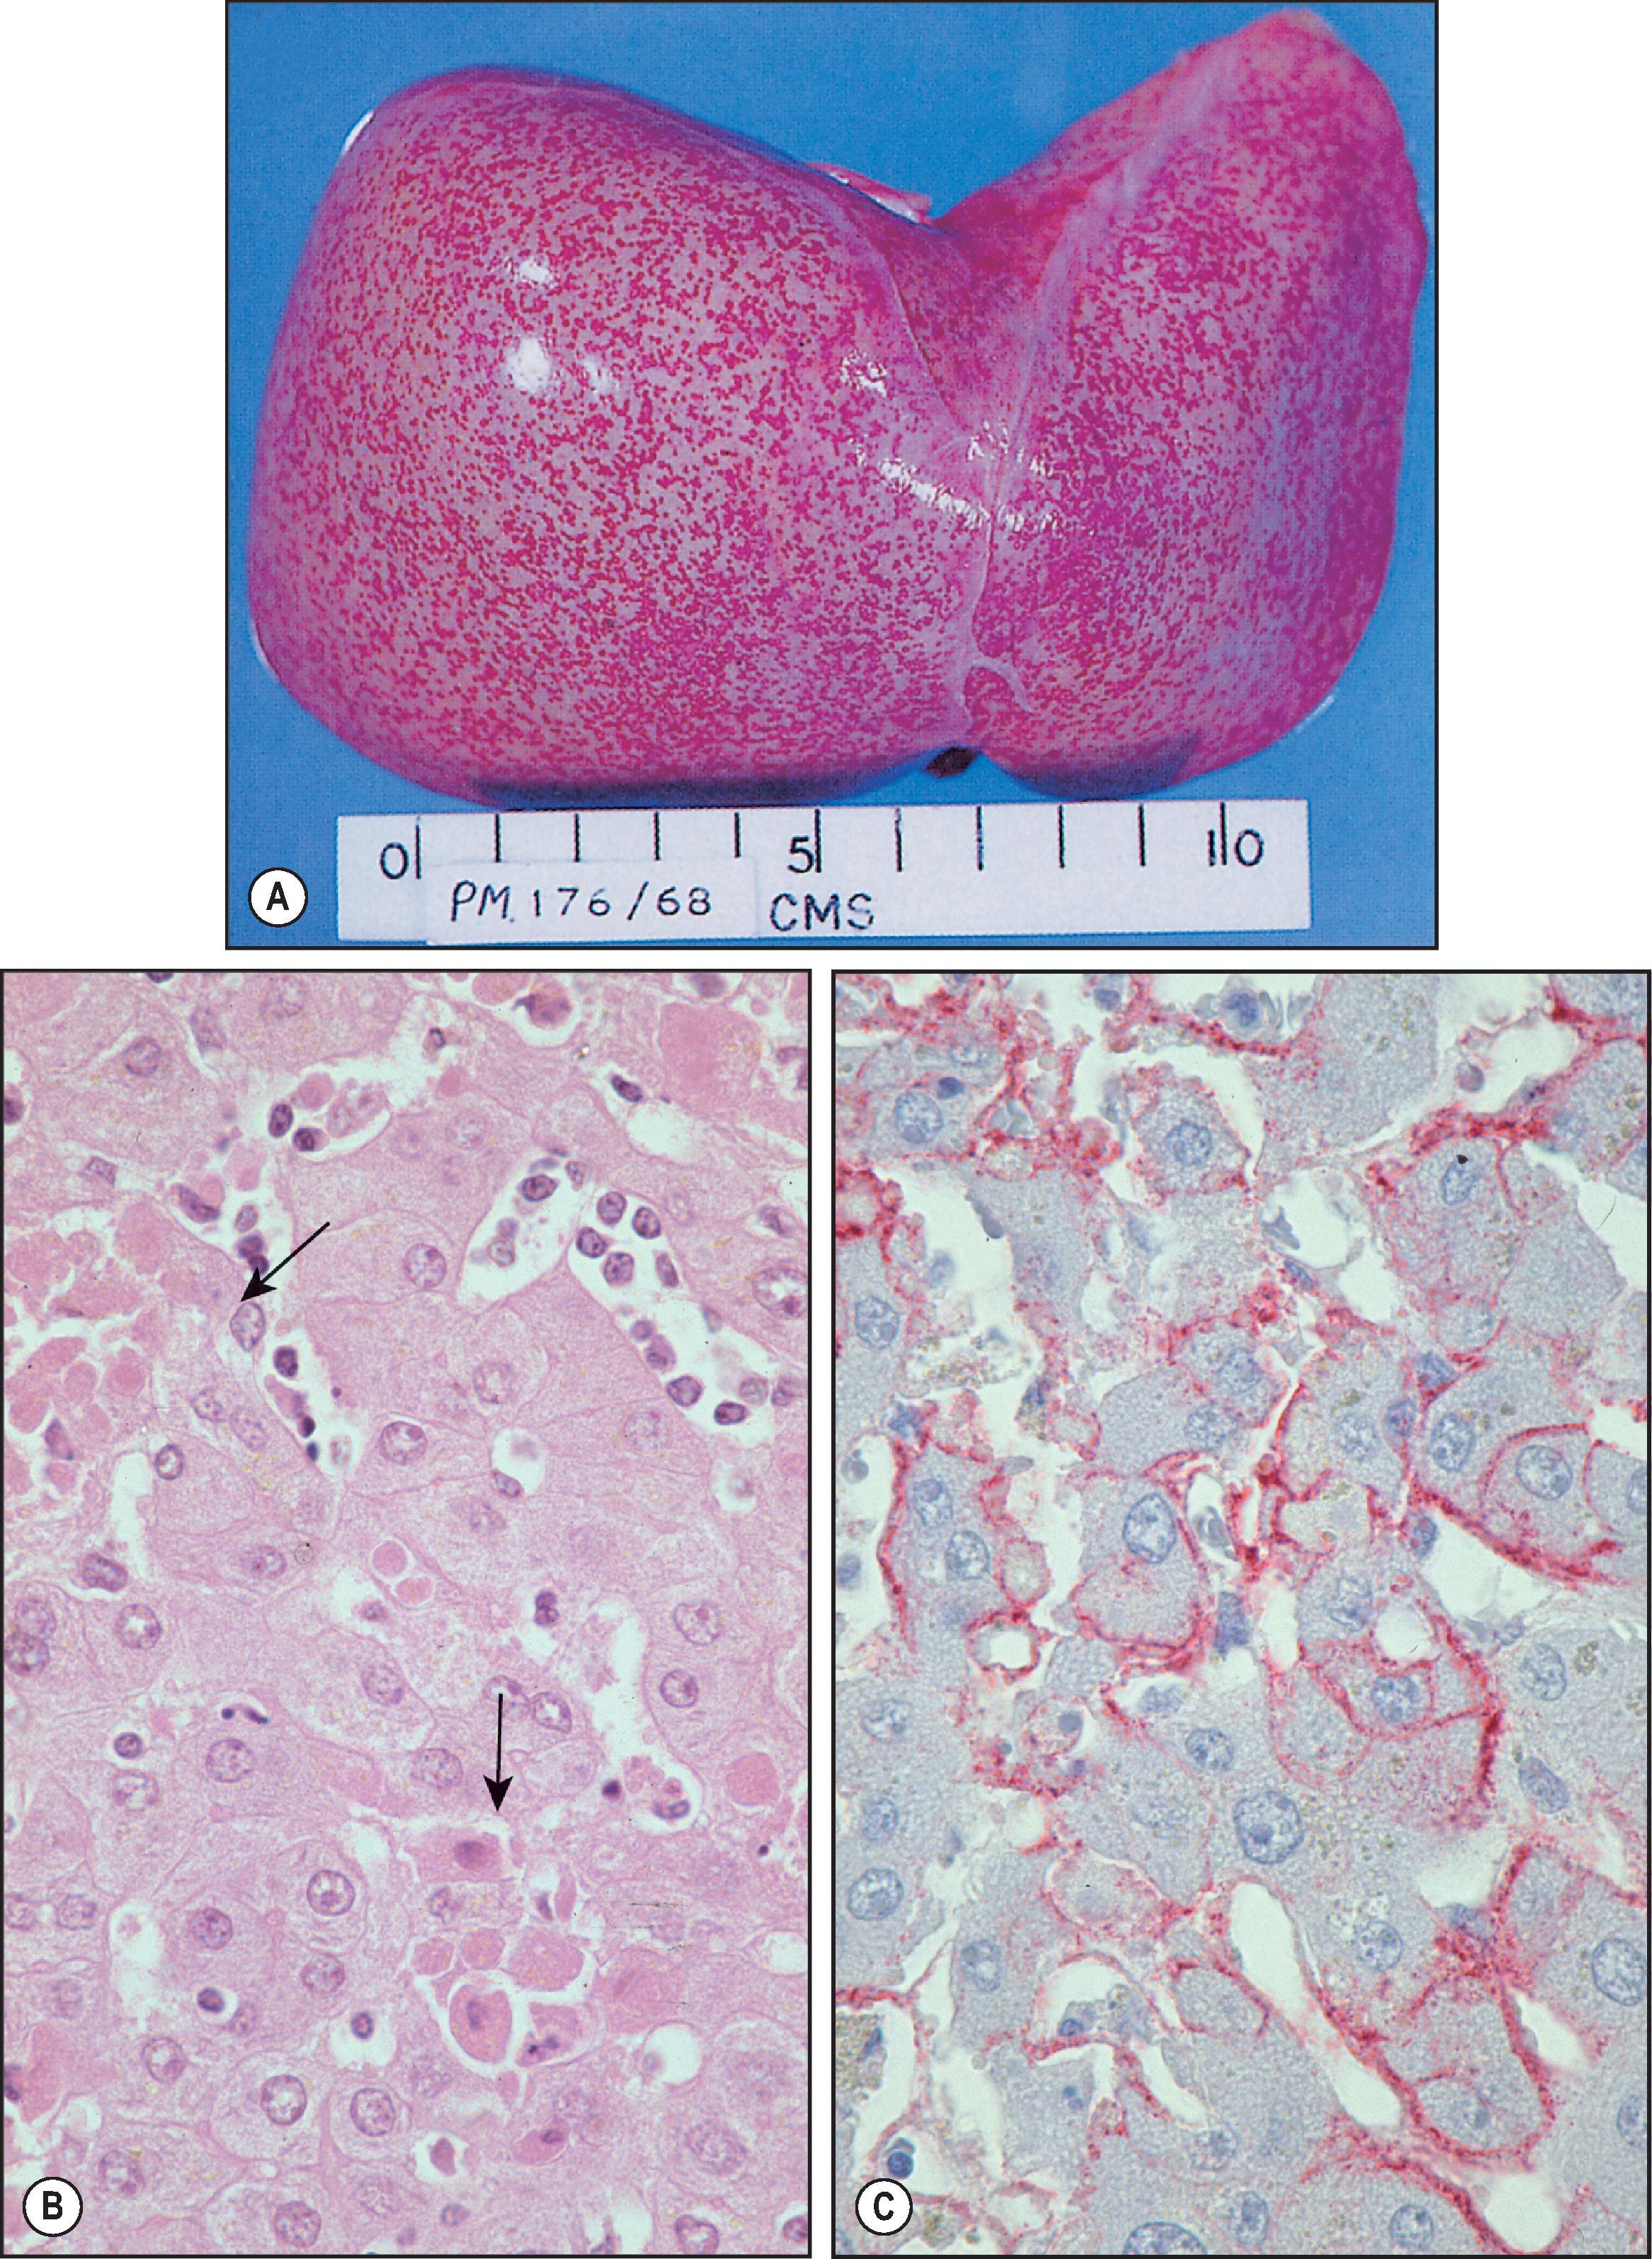 Figure 7.3, Lassa fever. (A) Autopsy liver from a Lassa fever patient showing foci of haemorrhagic necrosis under the capsule. (B Eosinophilic necrosis (arrows) and minimal inflammation in fatal Lassa fever. (H&E stain.) (C) Using immunohistochemistry, abundant Lassa virus antigens are seen in a membranous pattern surrounding hepatocytes and sinusoidal lining cells (immunoalkaline phosphatase staining, naphthol fast red substrate with haematoxylin counterstain).